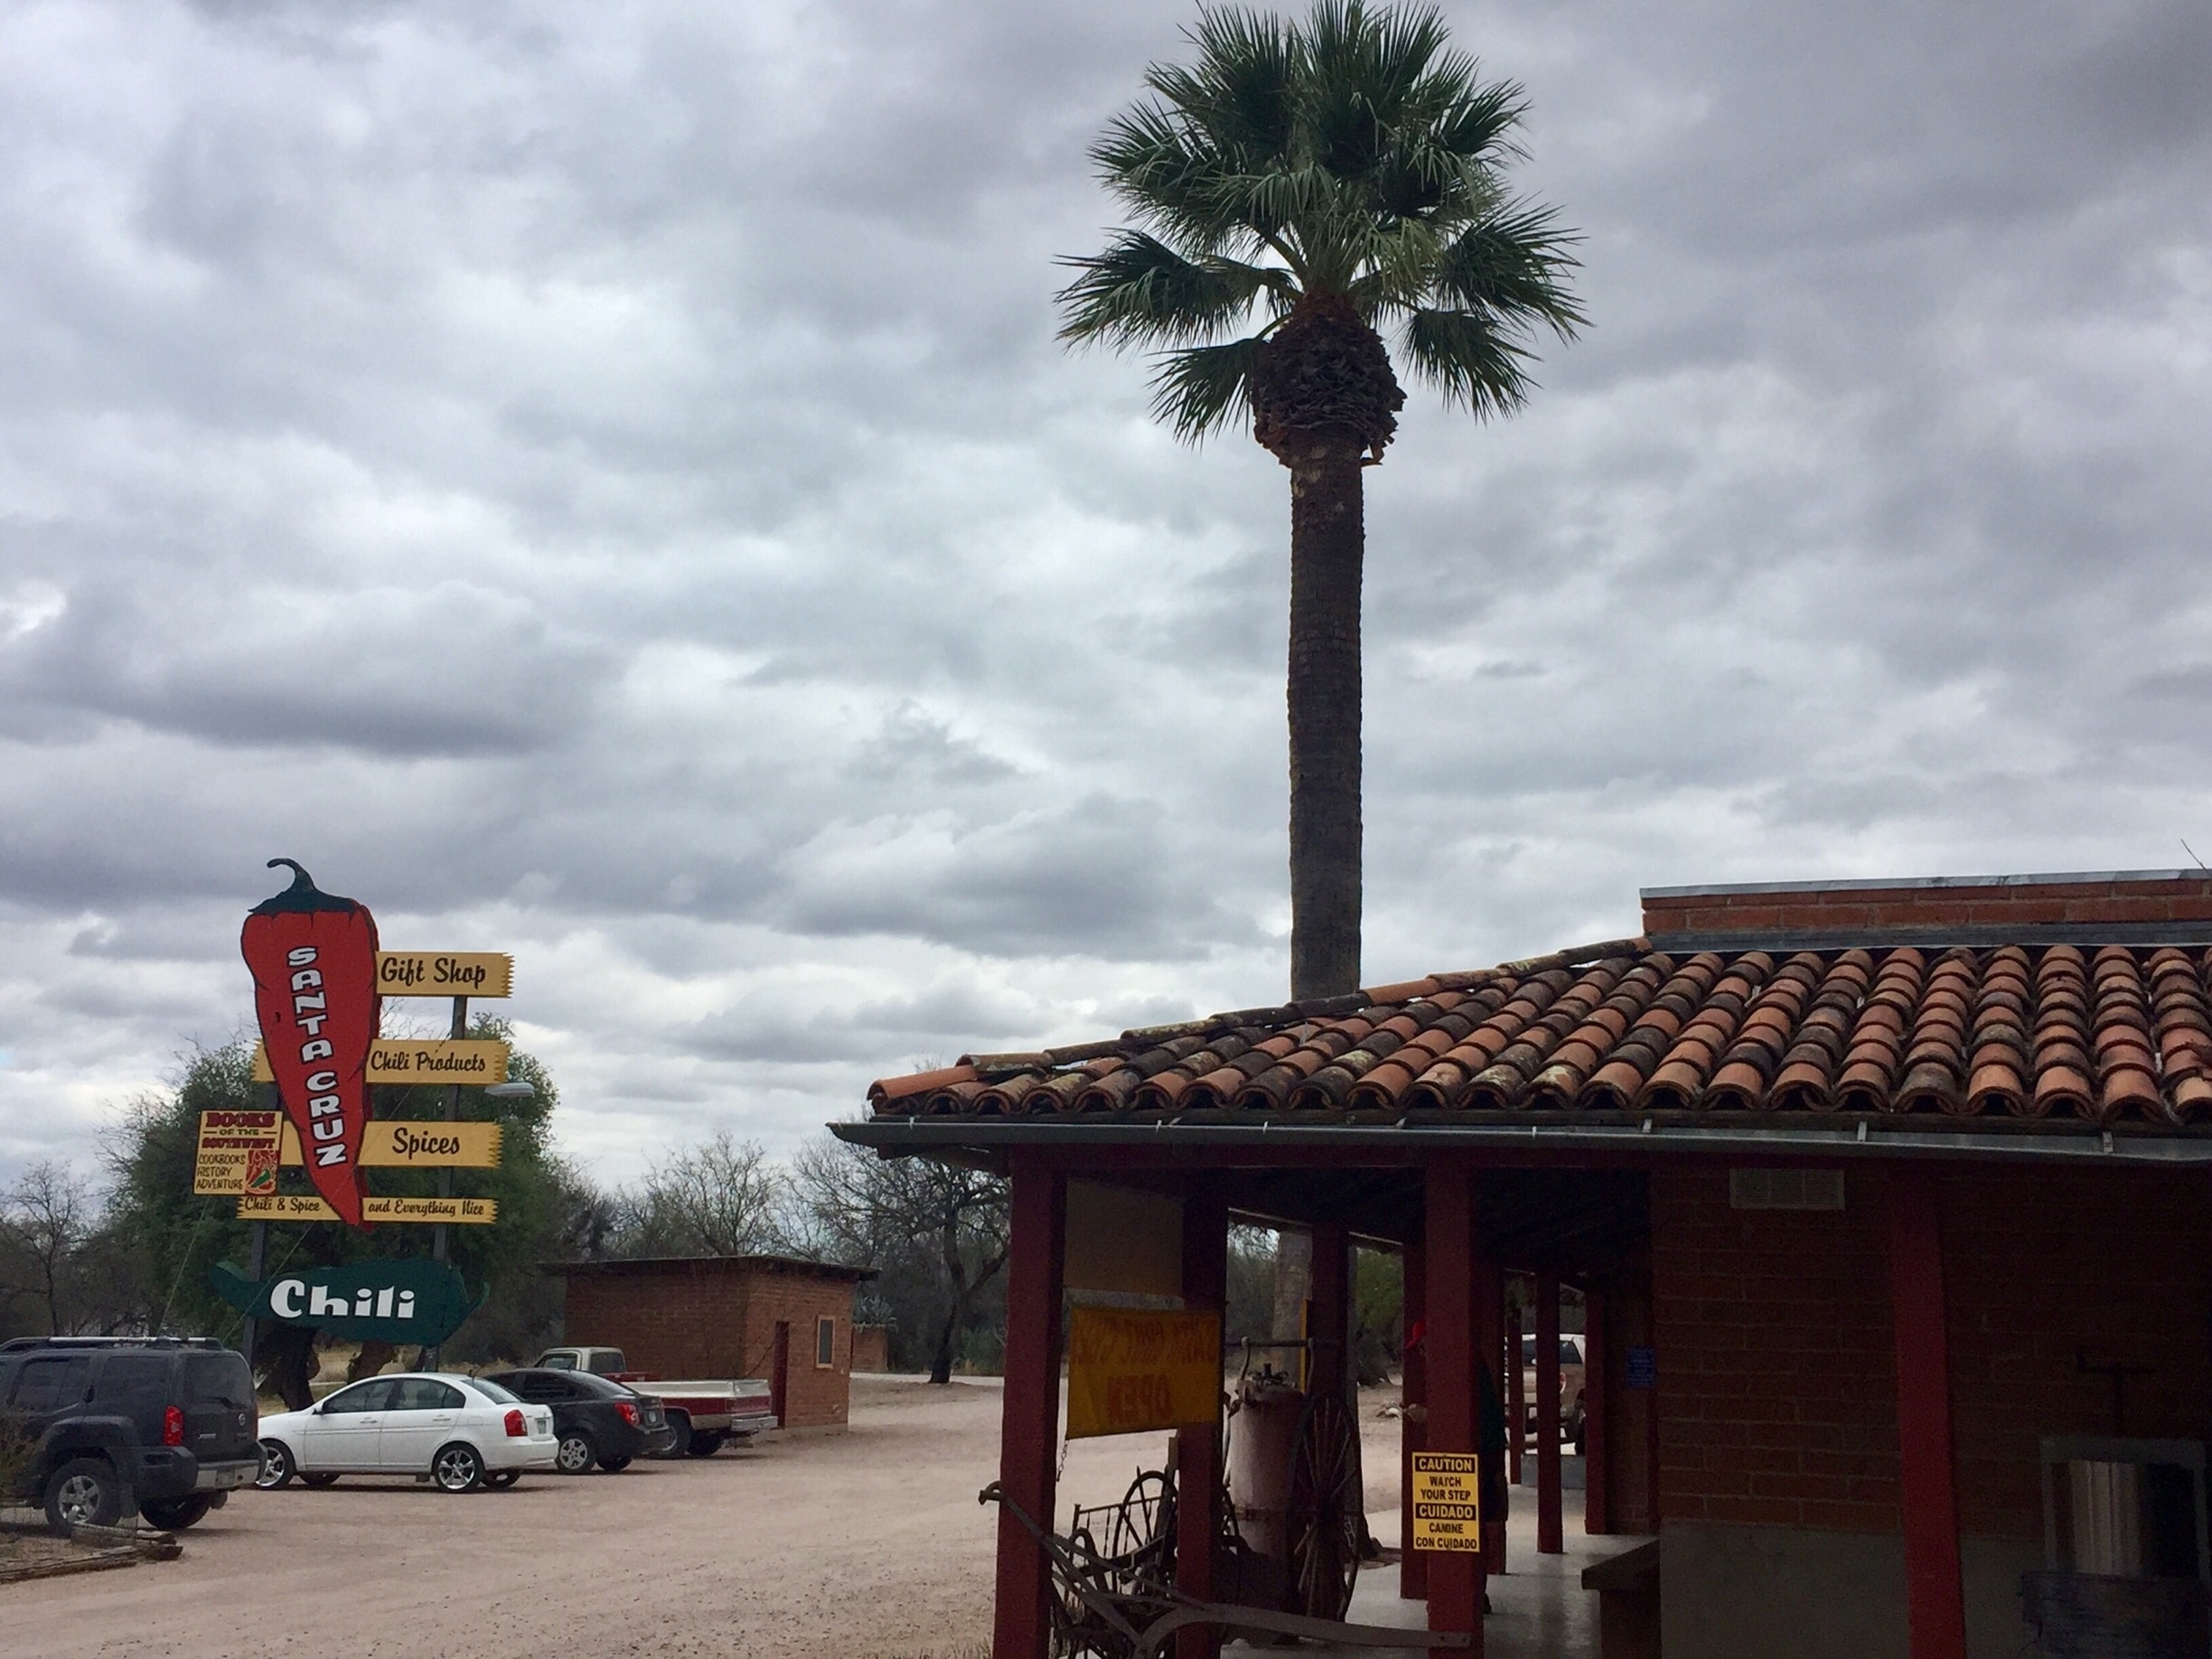 In business since 1943 and known for their Chili sauces. This was a  tasty find along  Arizonas backroads. 